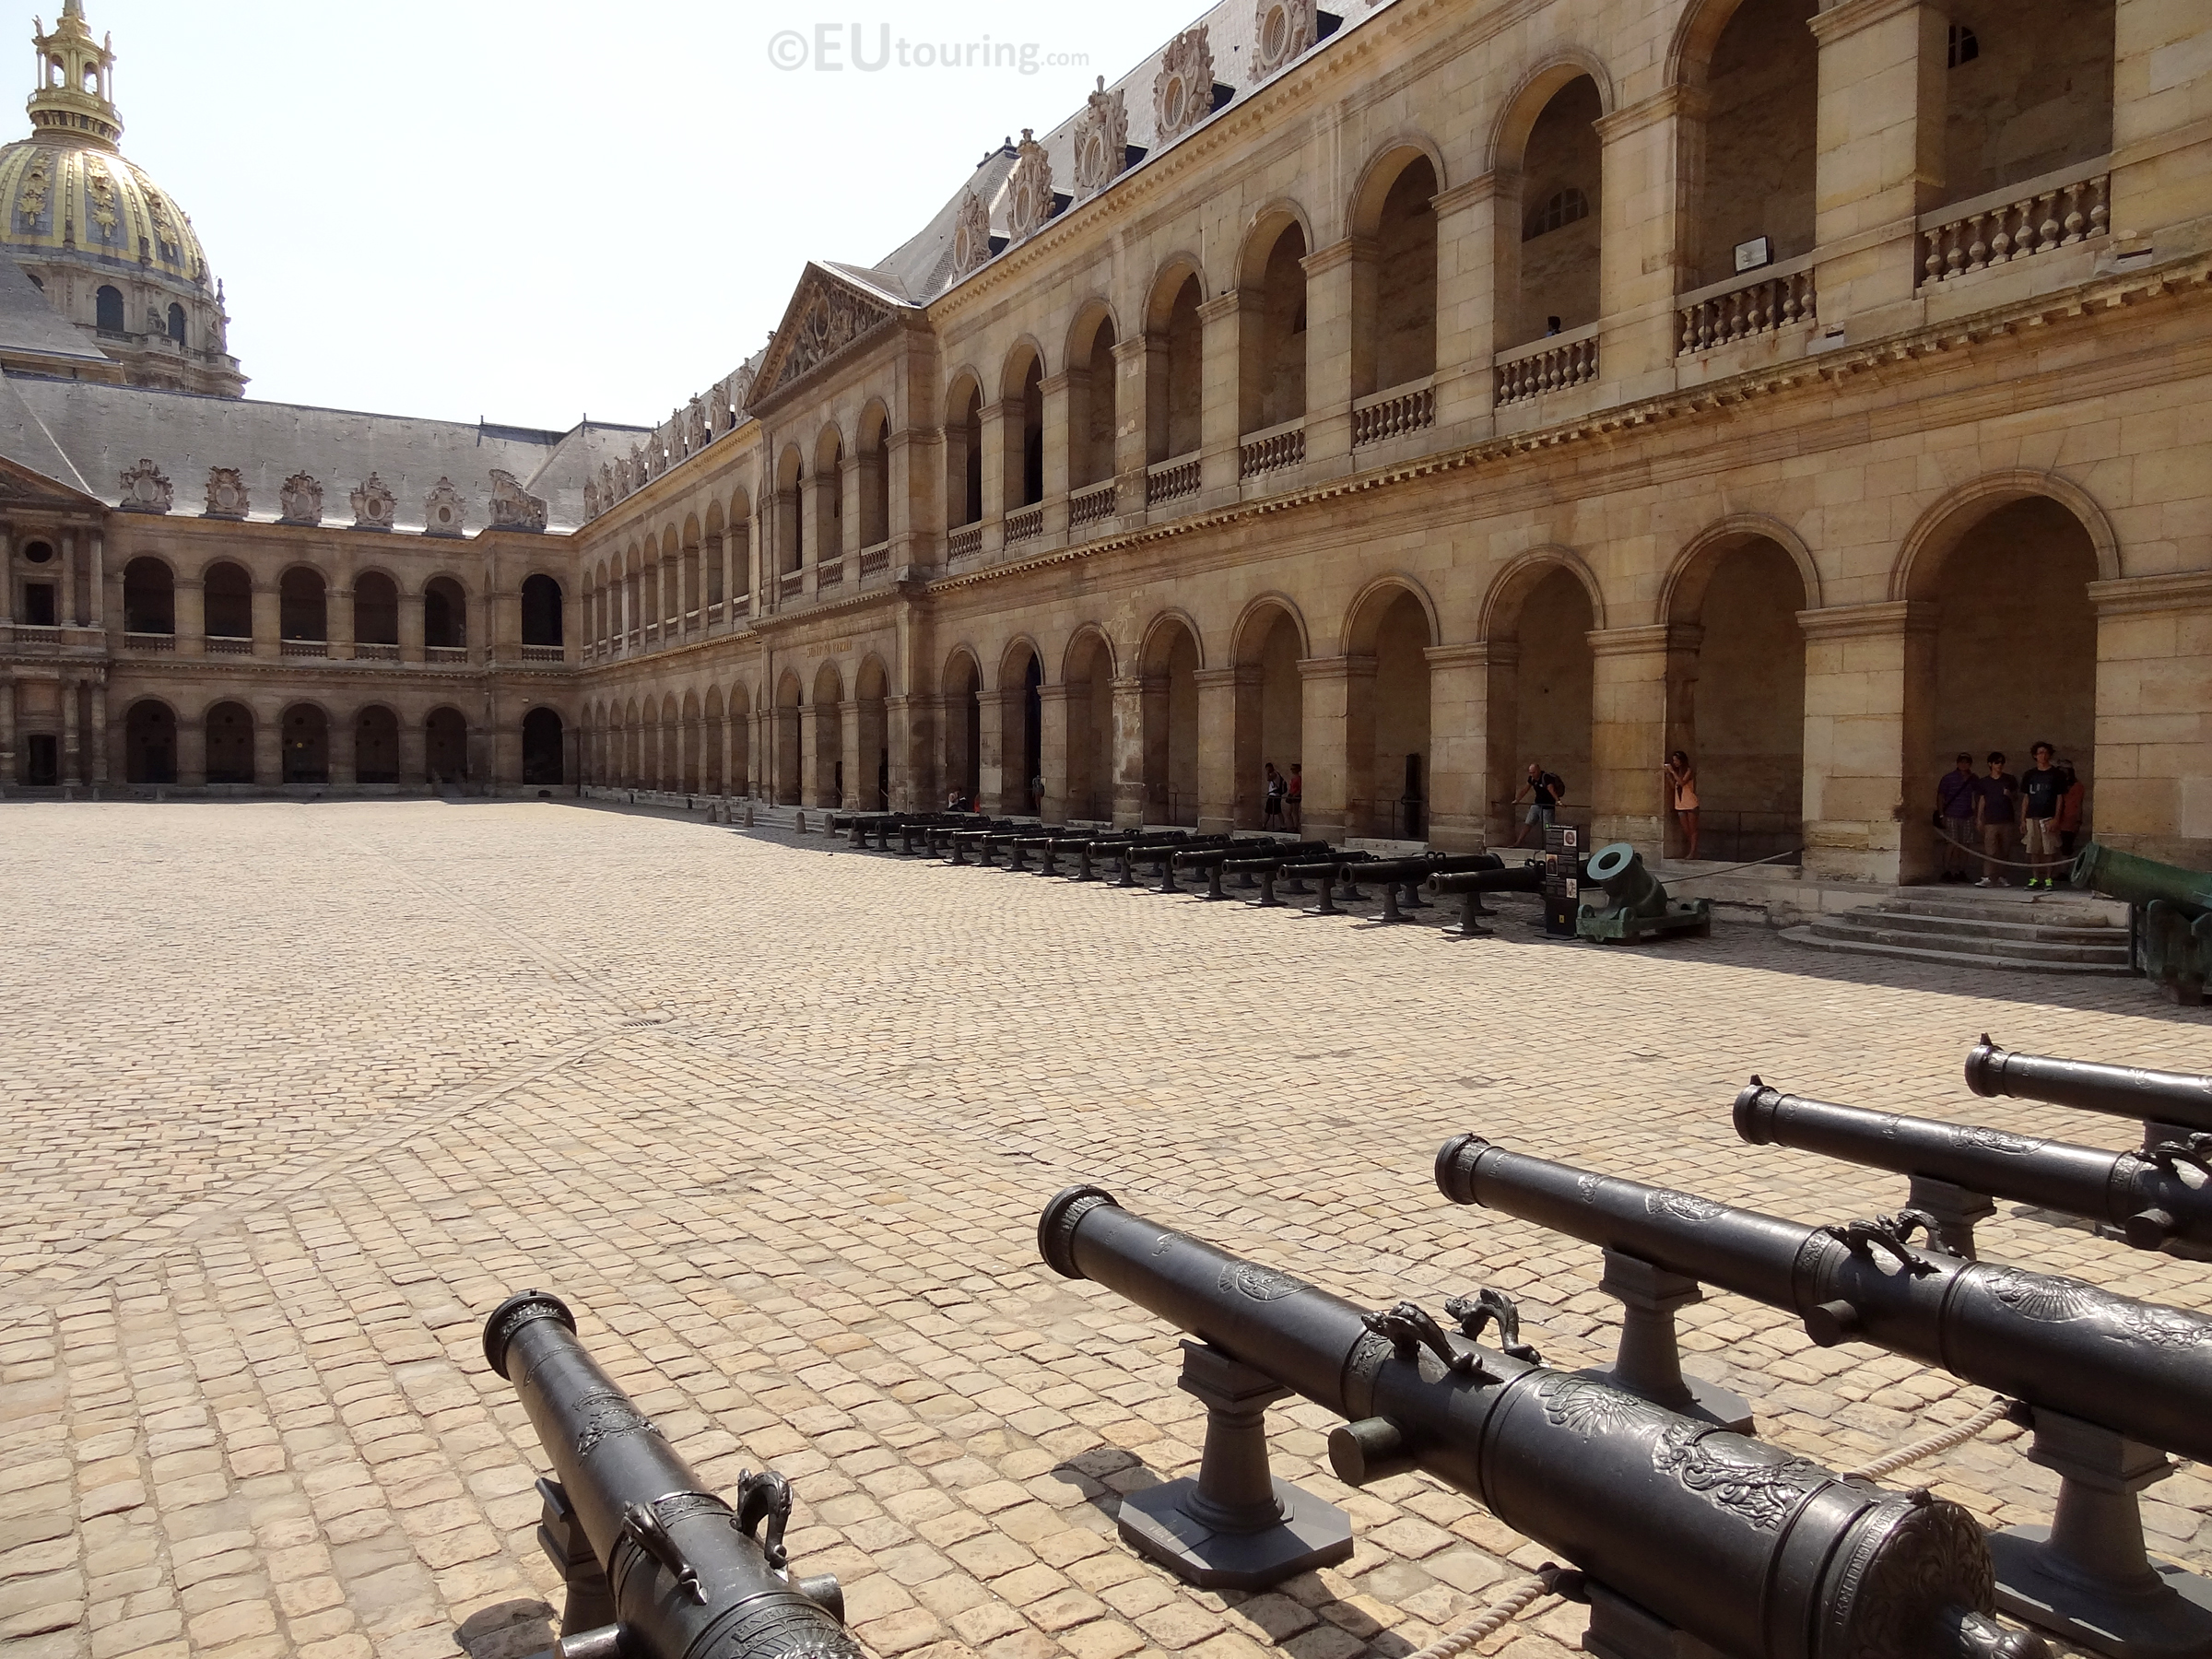 Various cannons within the courtyard